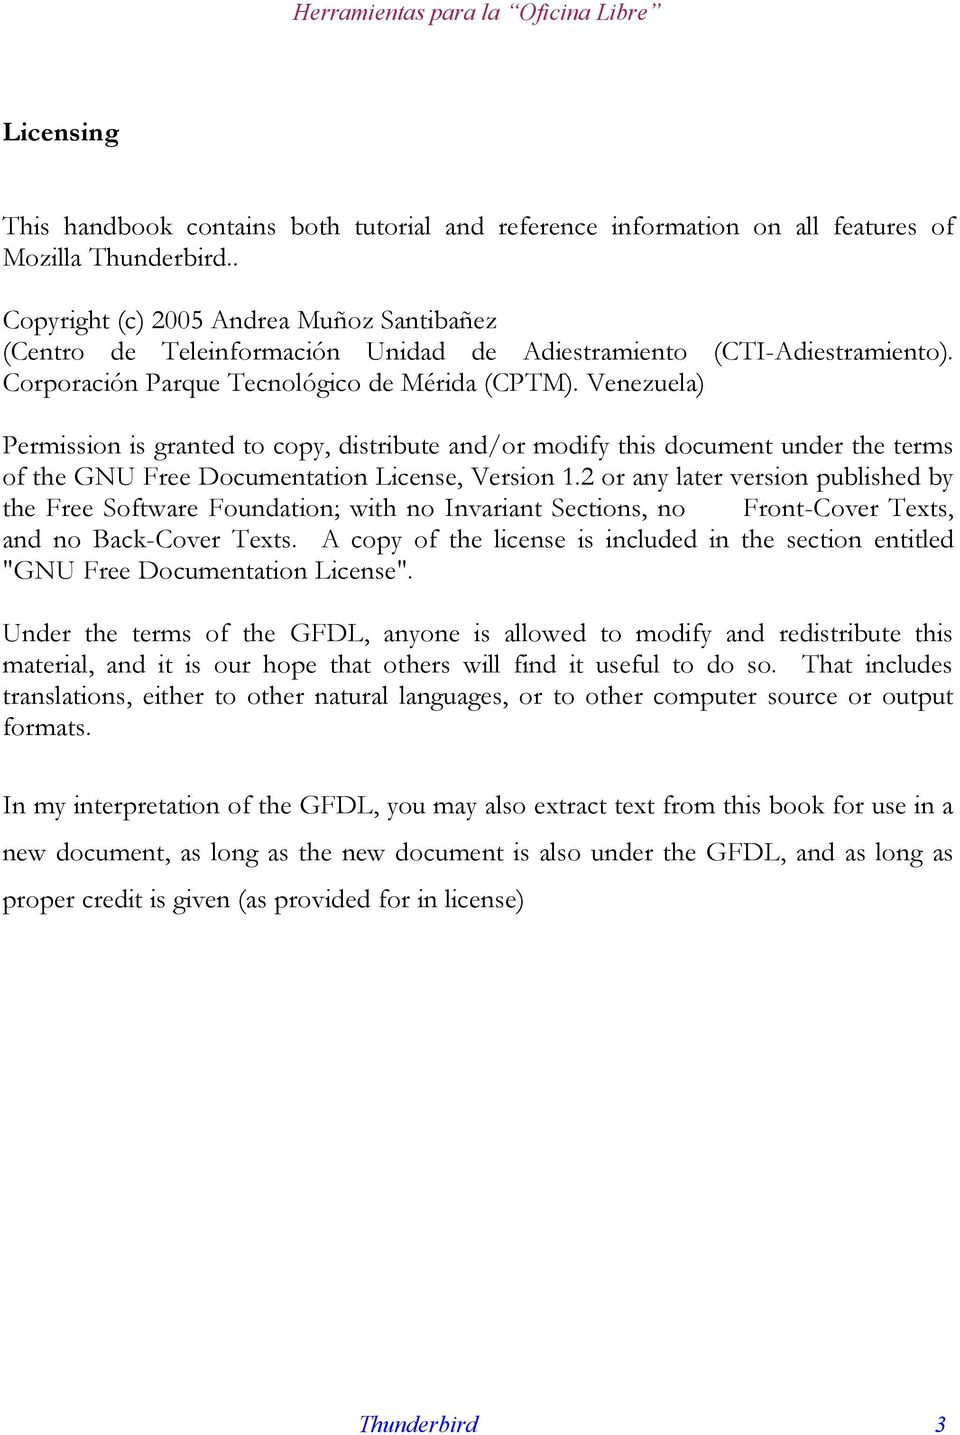 Venezuela) Permission is granted to copy, distribute and/or modify this document under the terms of the GNU Free Documentation License, Version 1.